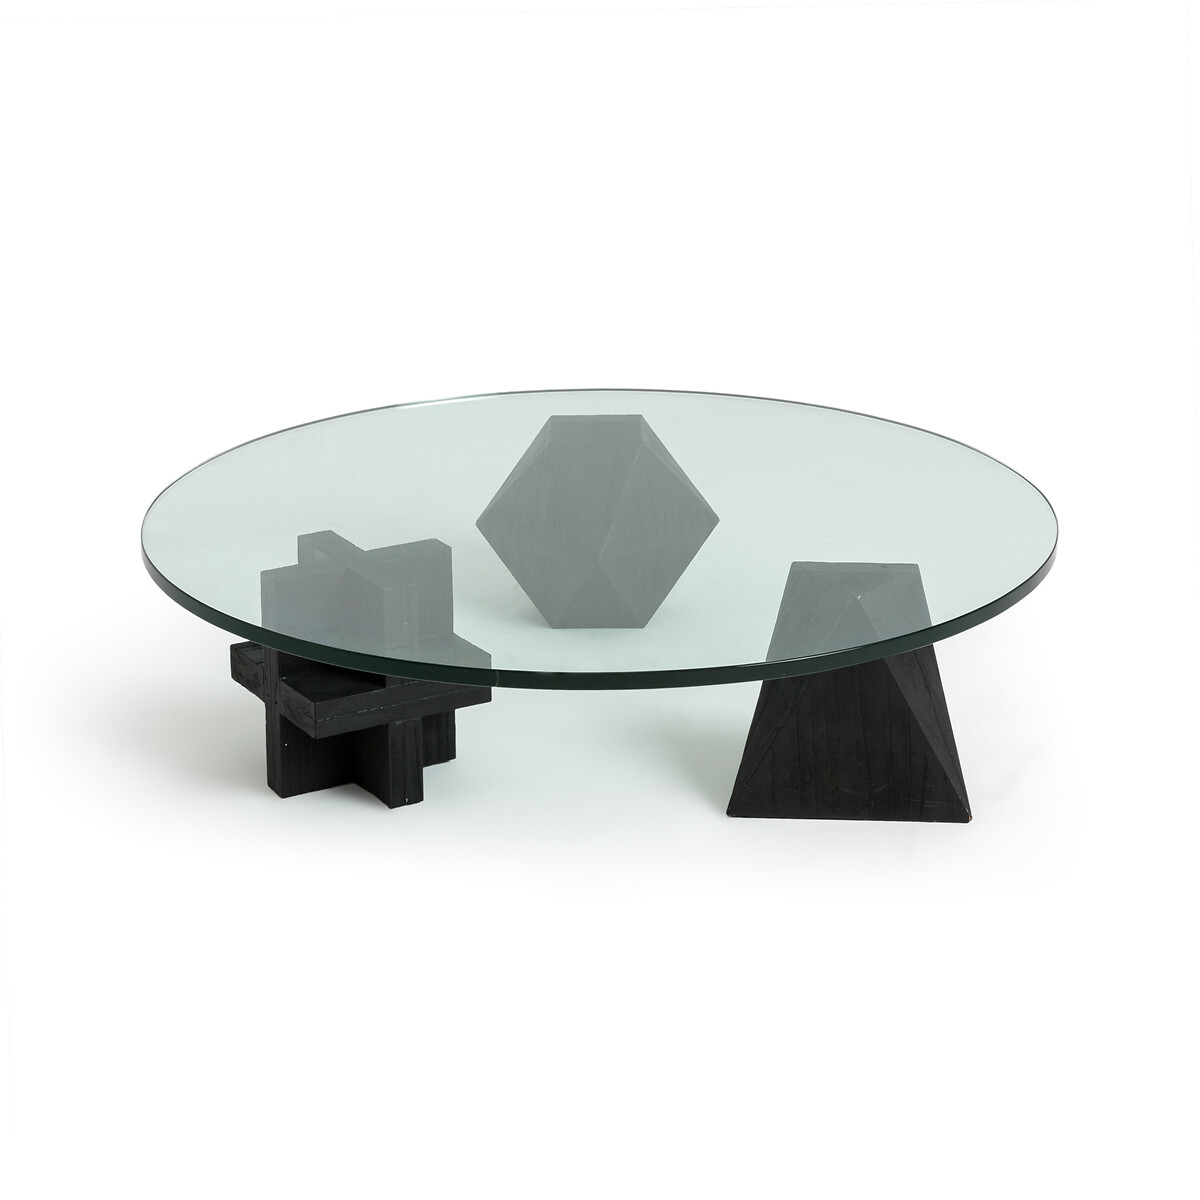 Bruli Polyhedral Tempered Glass Coffee Table